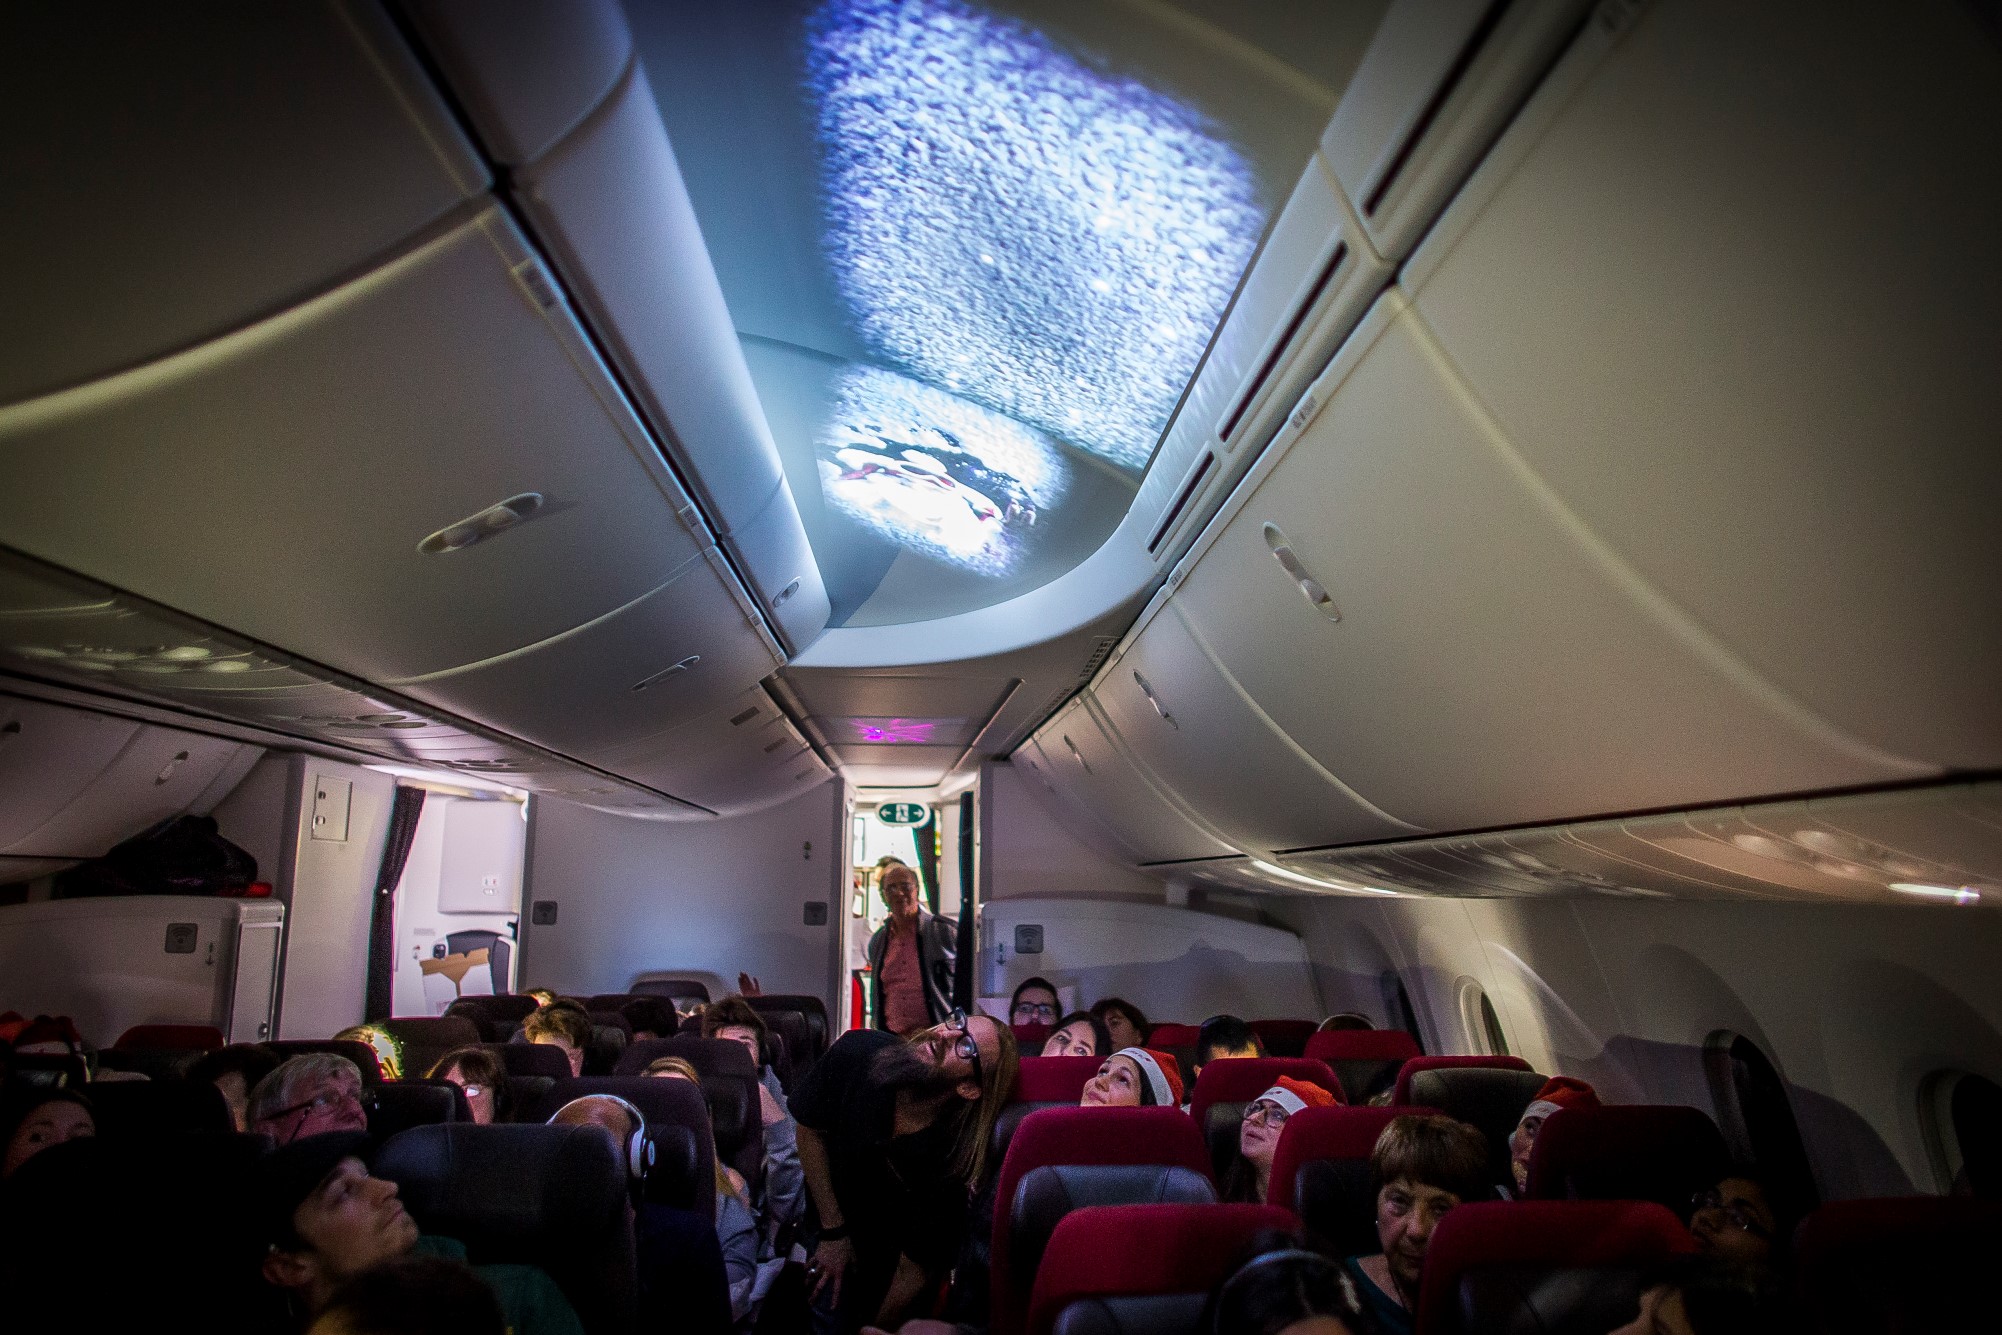 Through a series of projections on to the cabin ceiling, passengers watched the sleigh of Father Christmas land on the plane